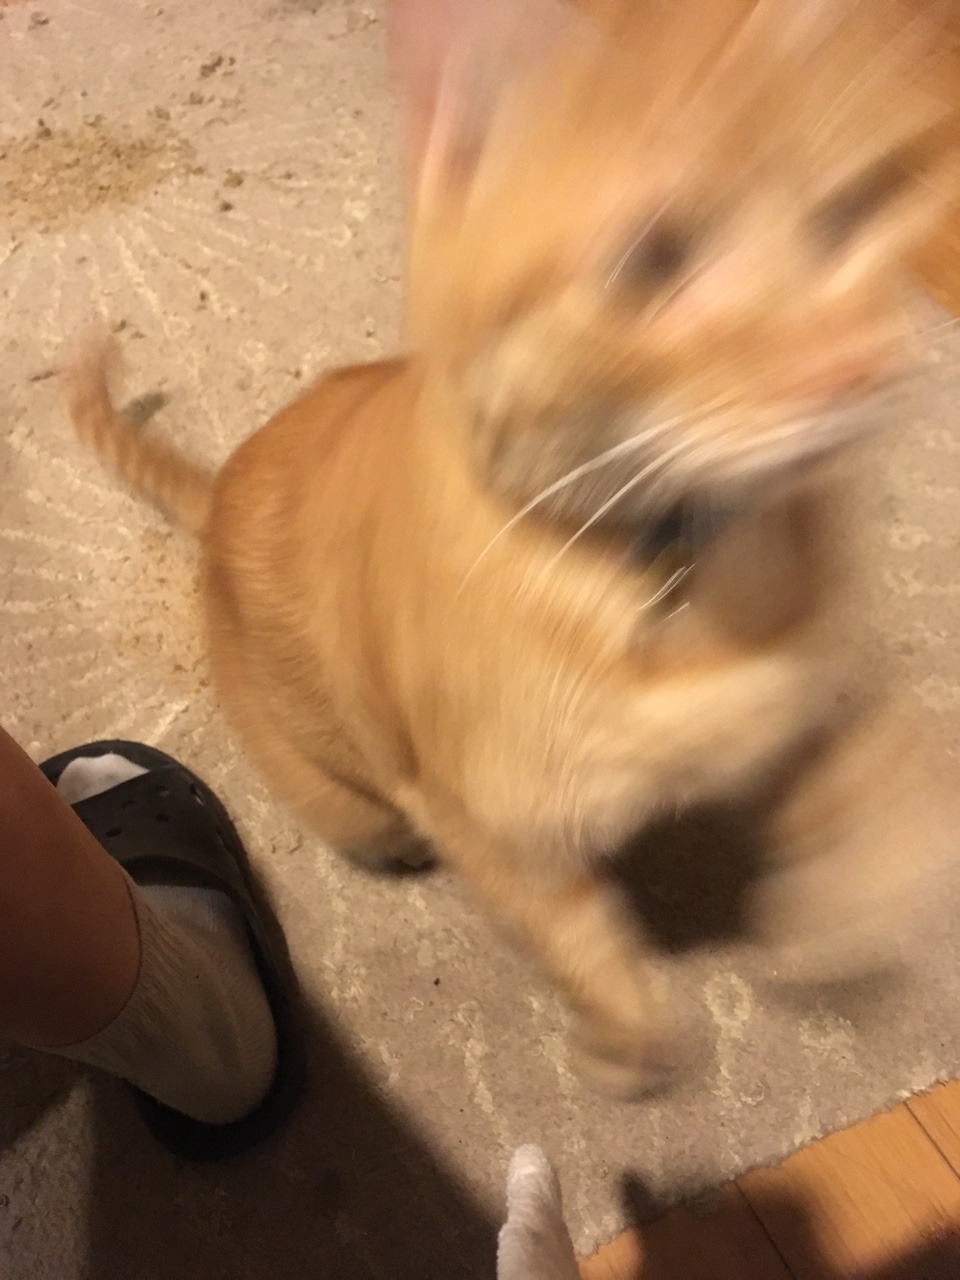 That moment when you try to get an adorable picture of a kitty and they jump right